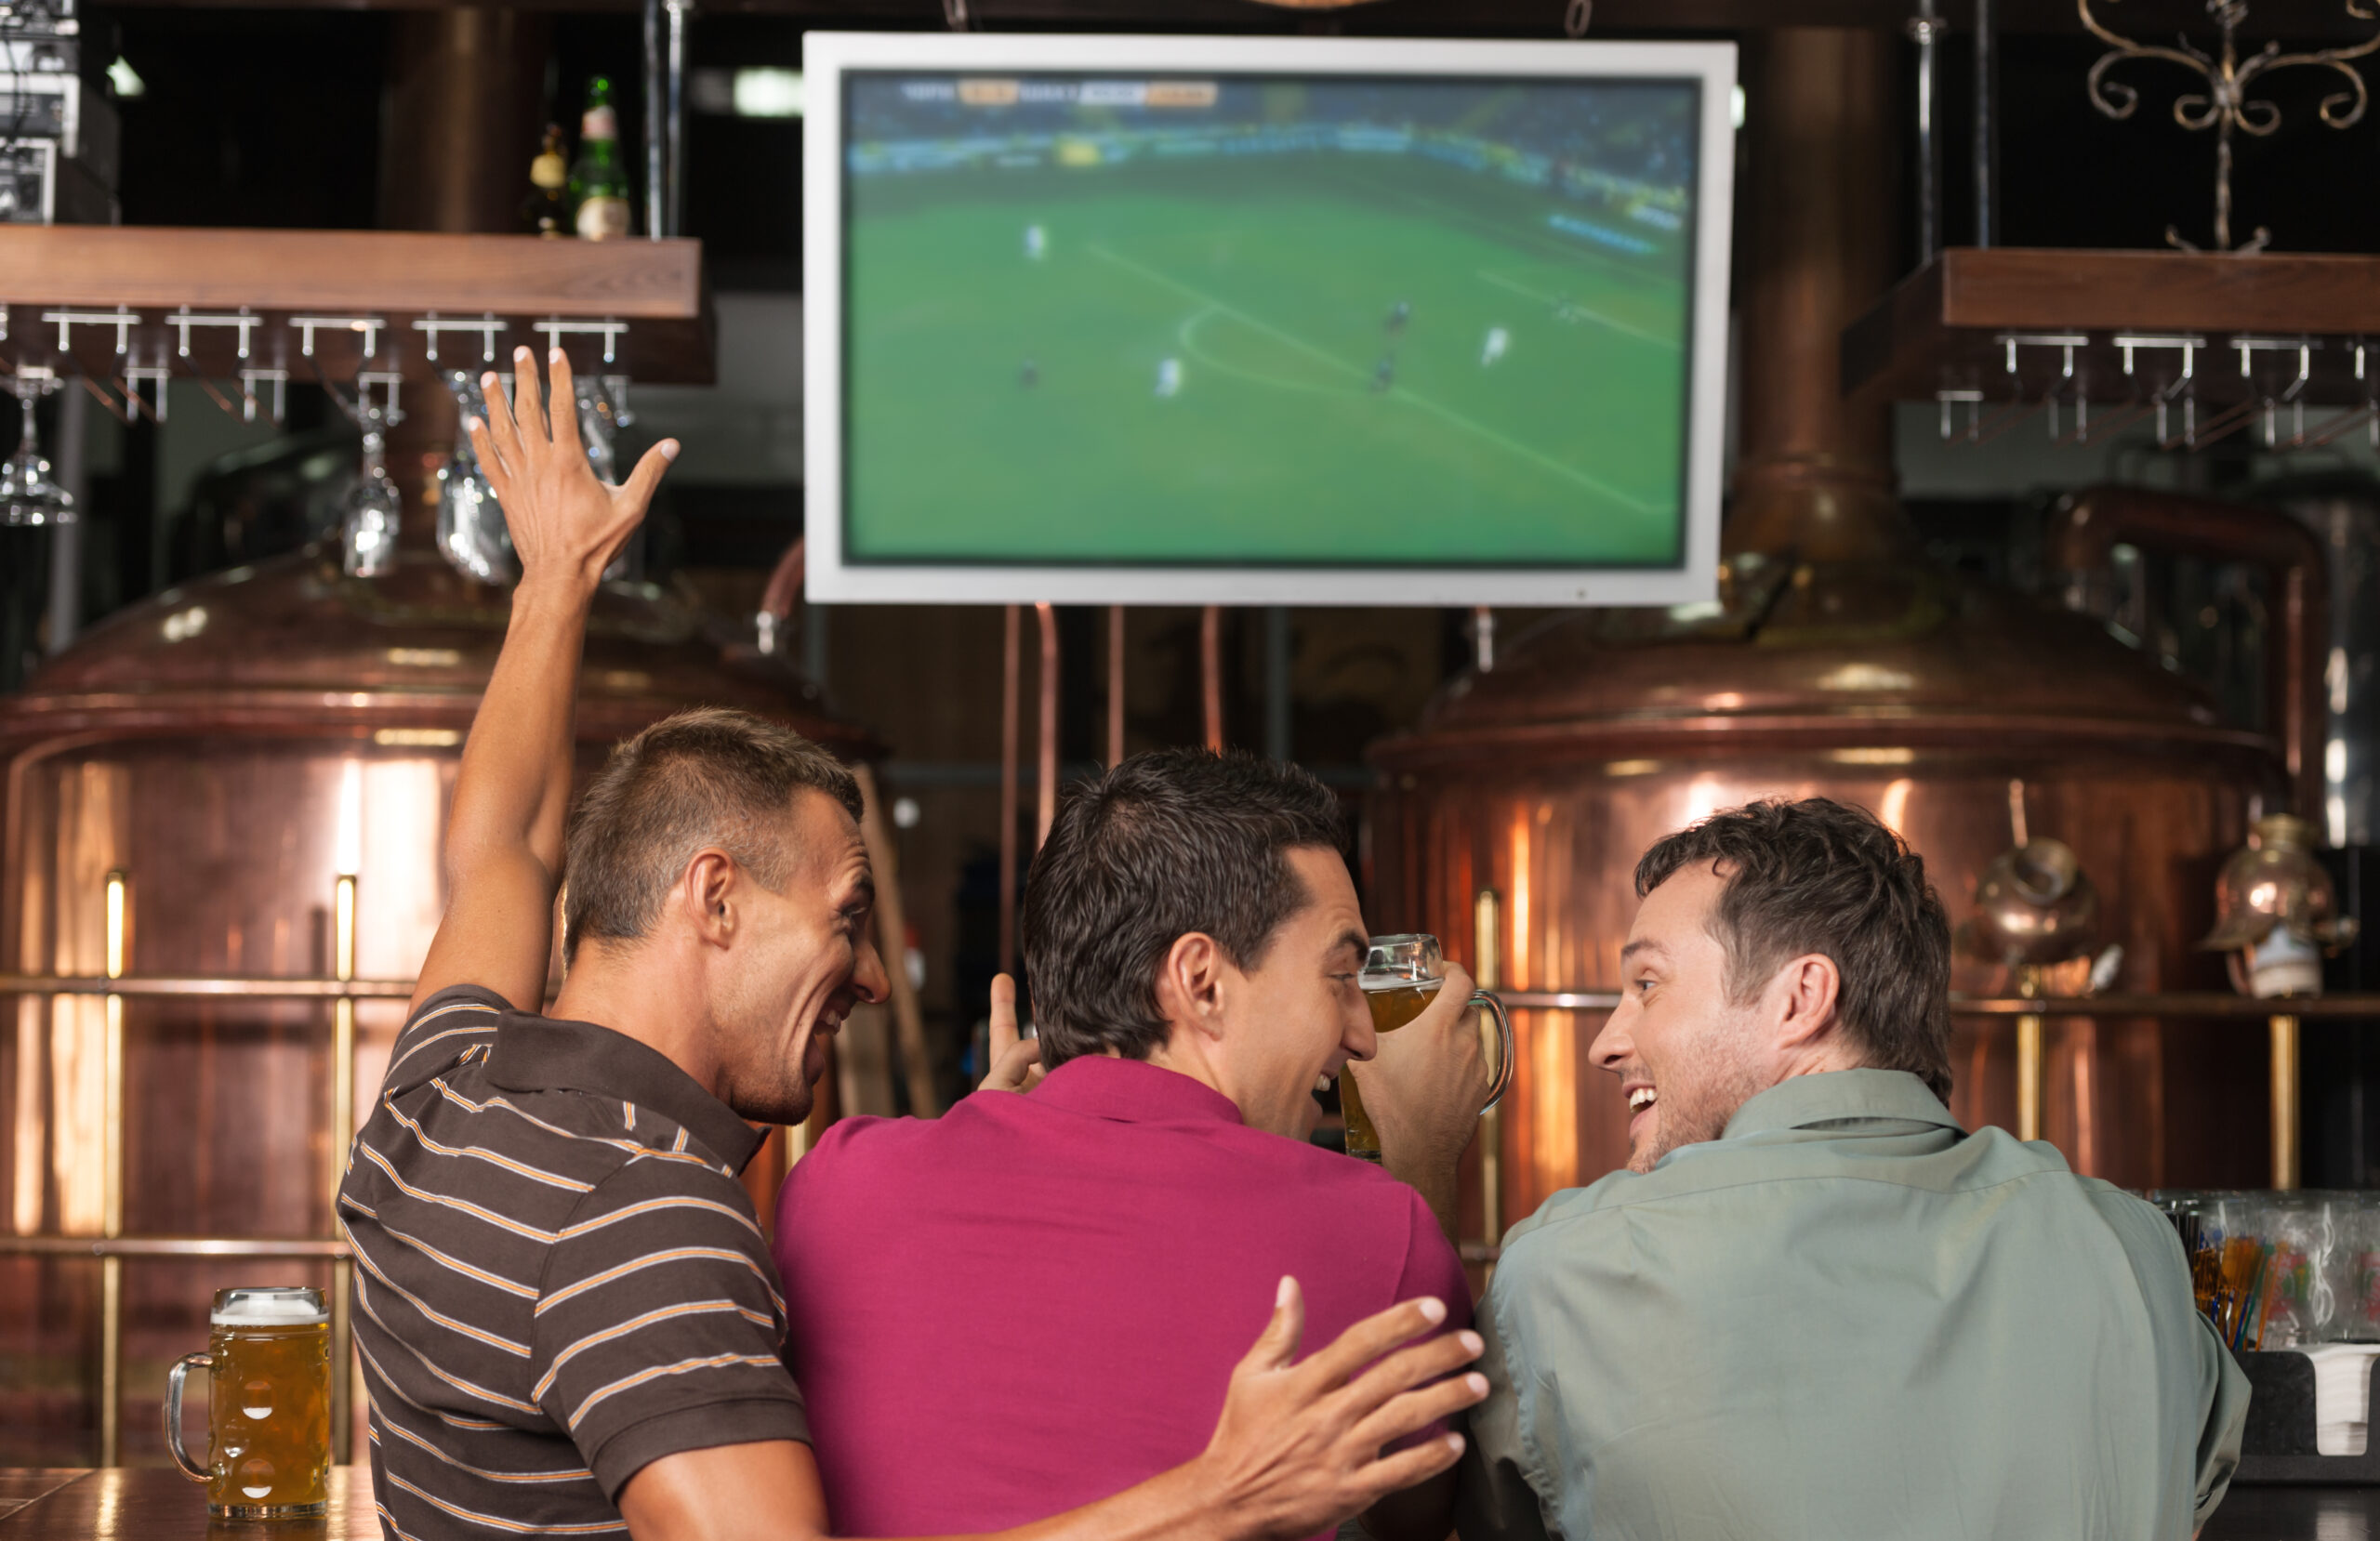 Men watching football on the TV in pub